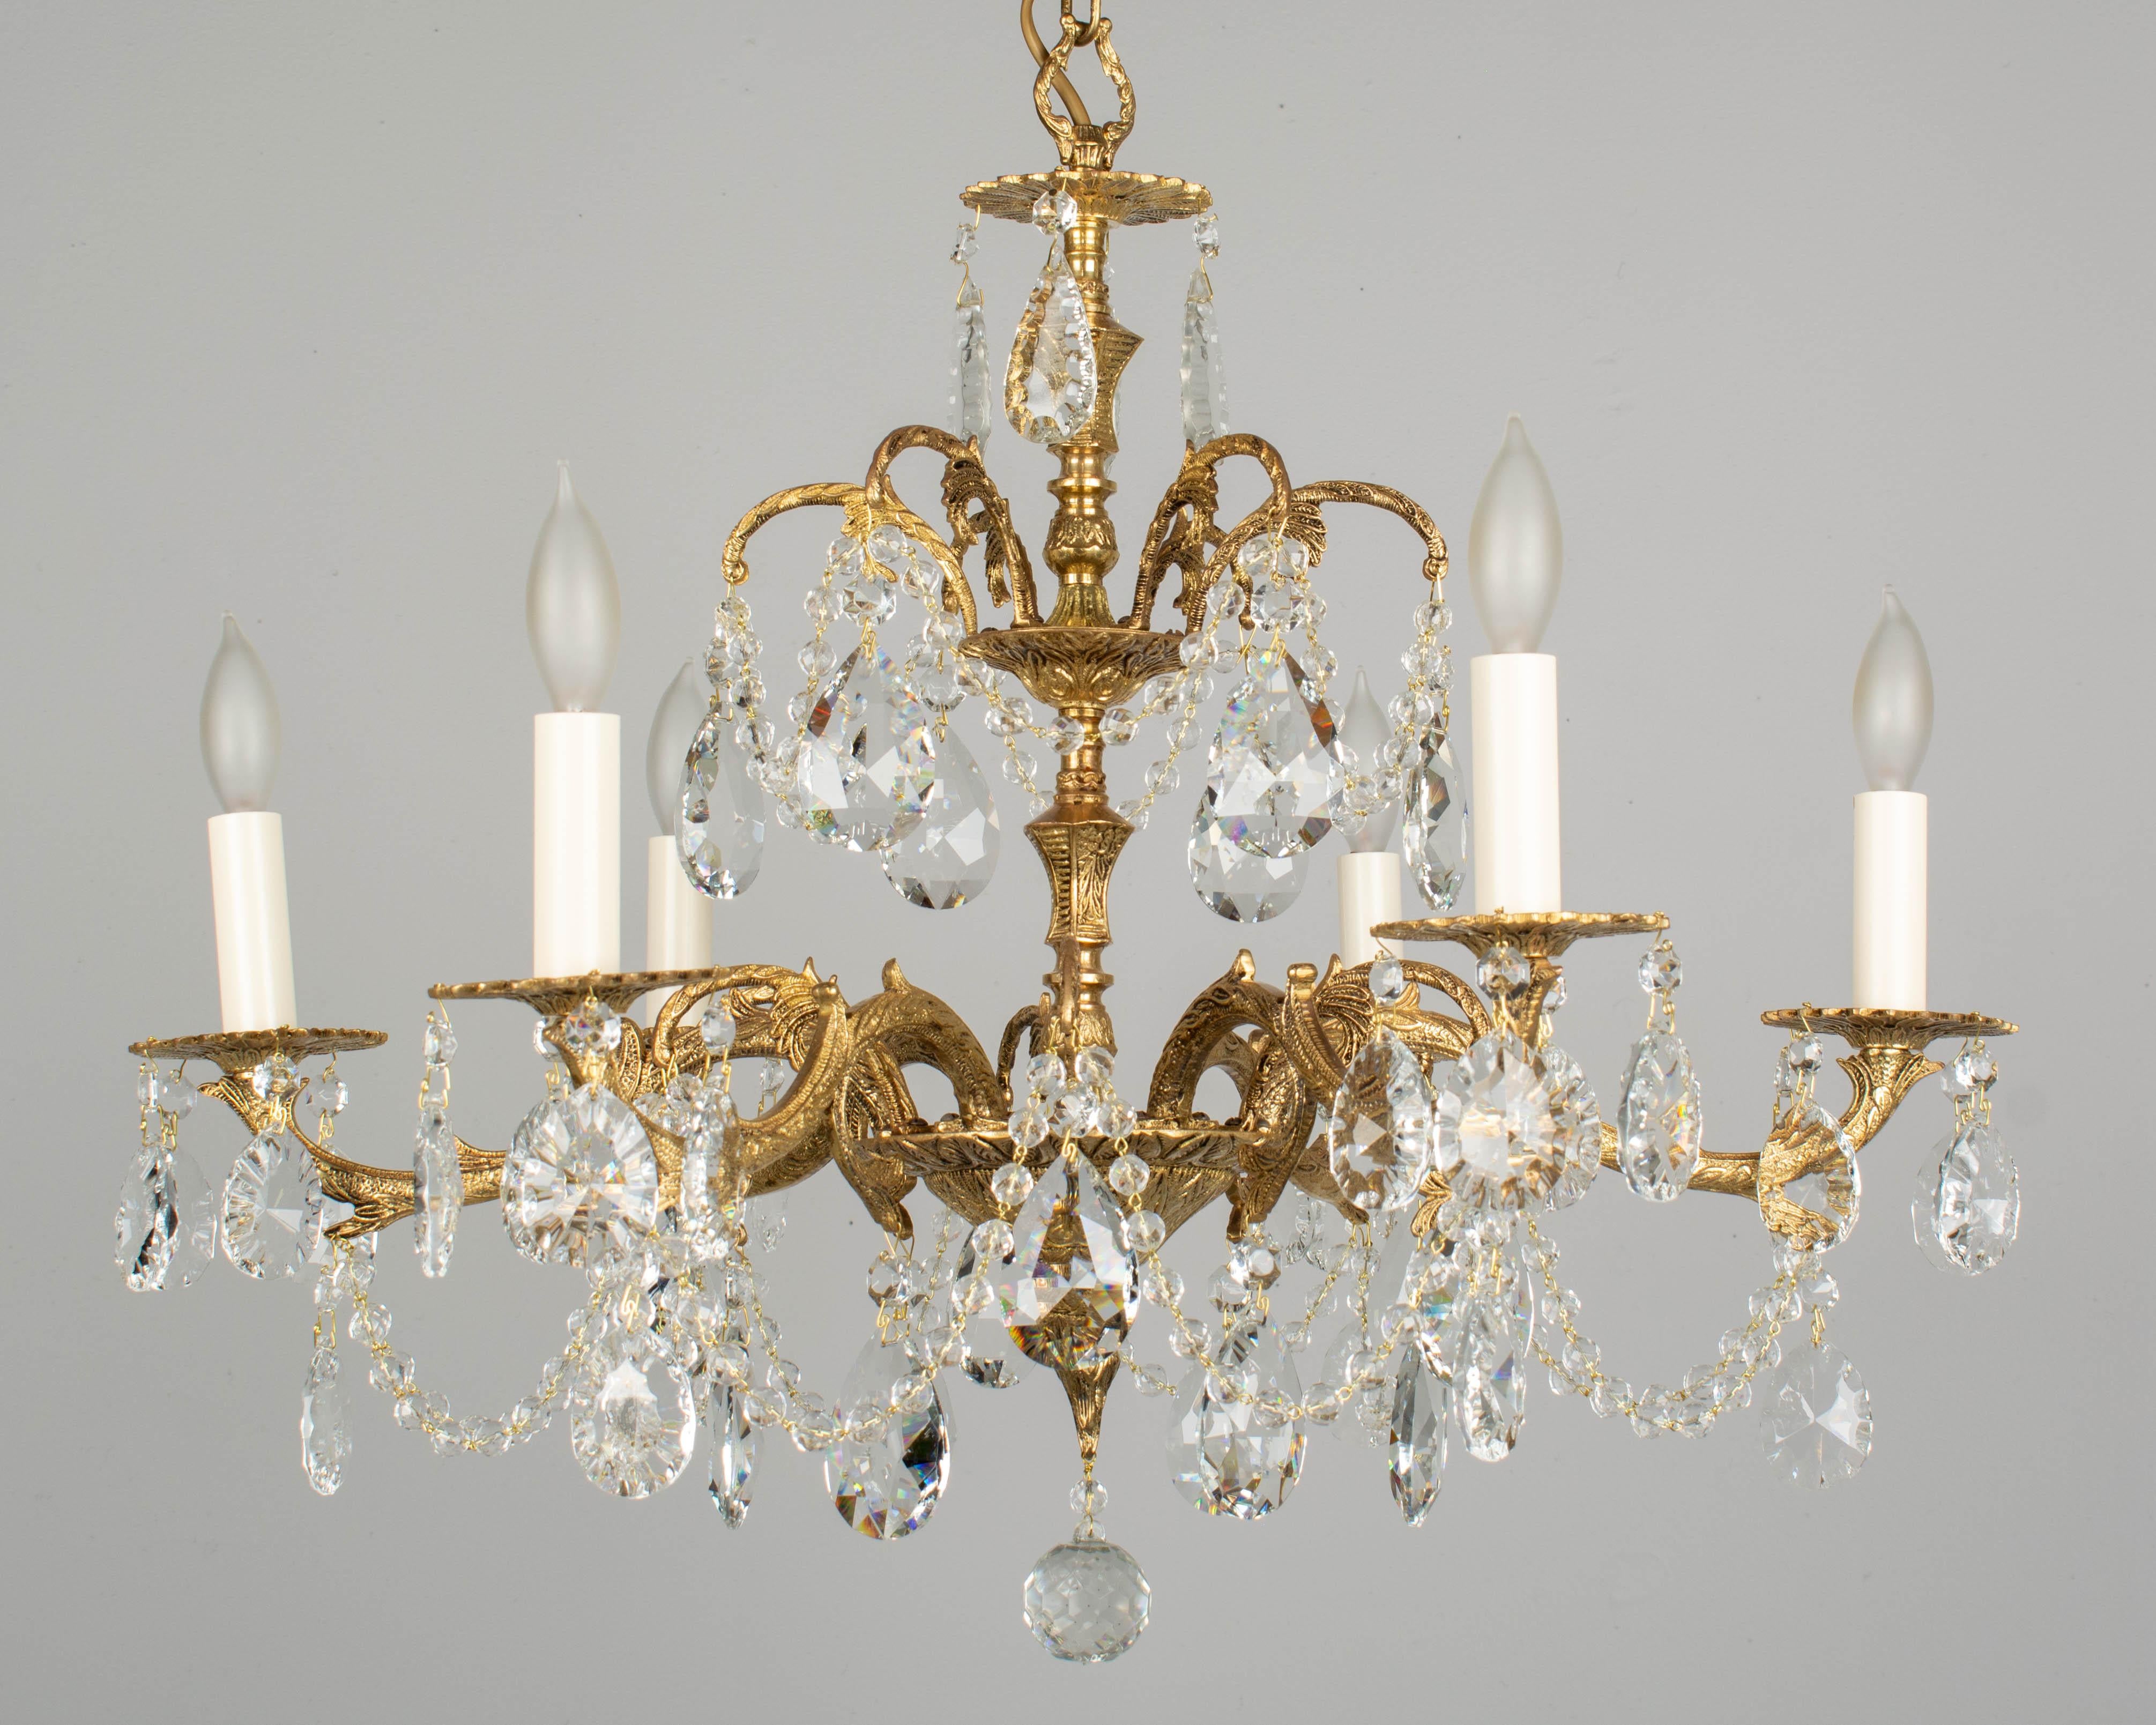 A Spanish six-light crystal chandelier with high quality solid cast brass frame and canopy. The frame is vintage 1950s and the crystals and bead chain are new. Stamped: Made in Spain. Measures: 23